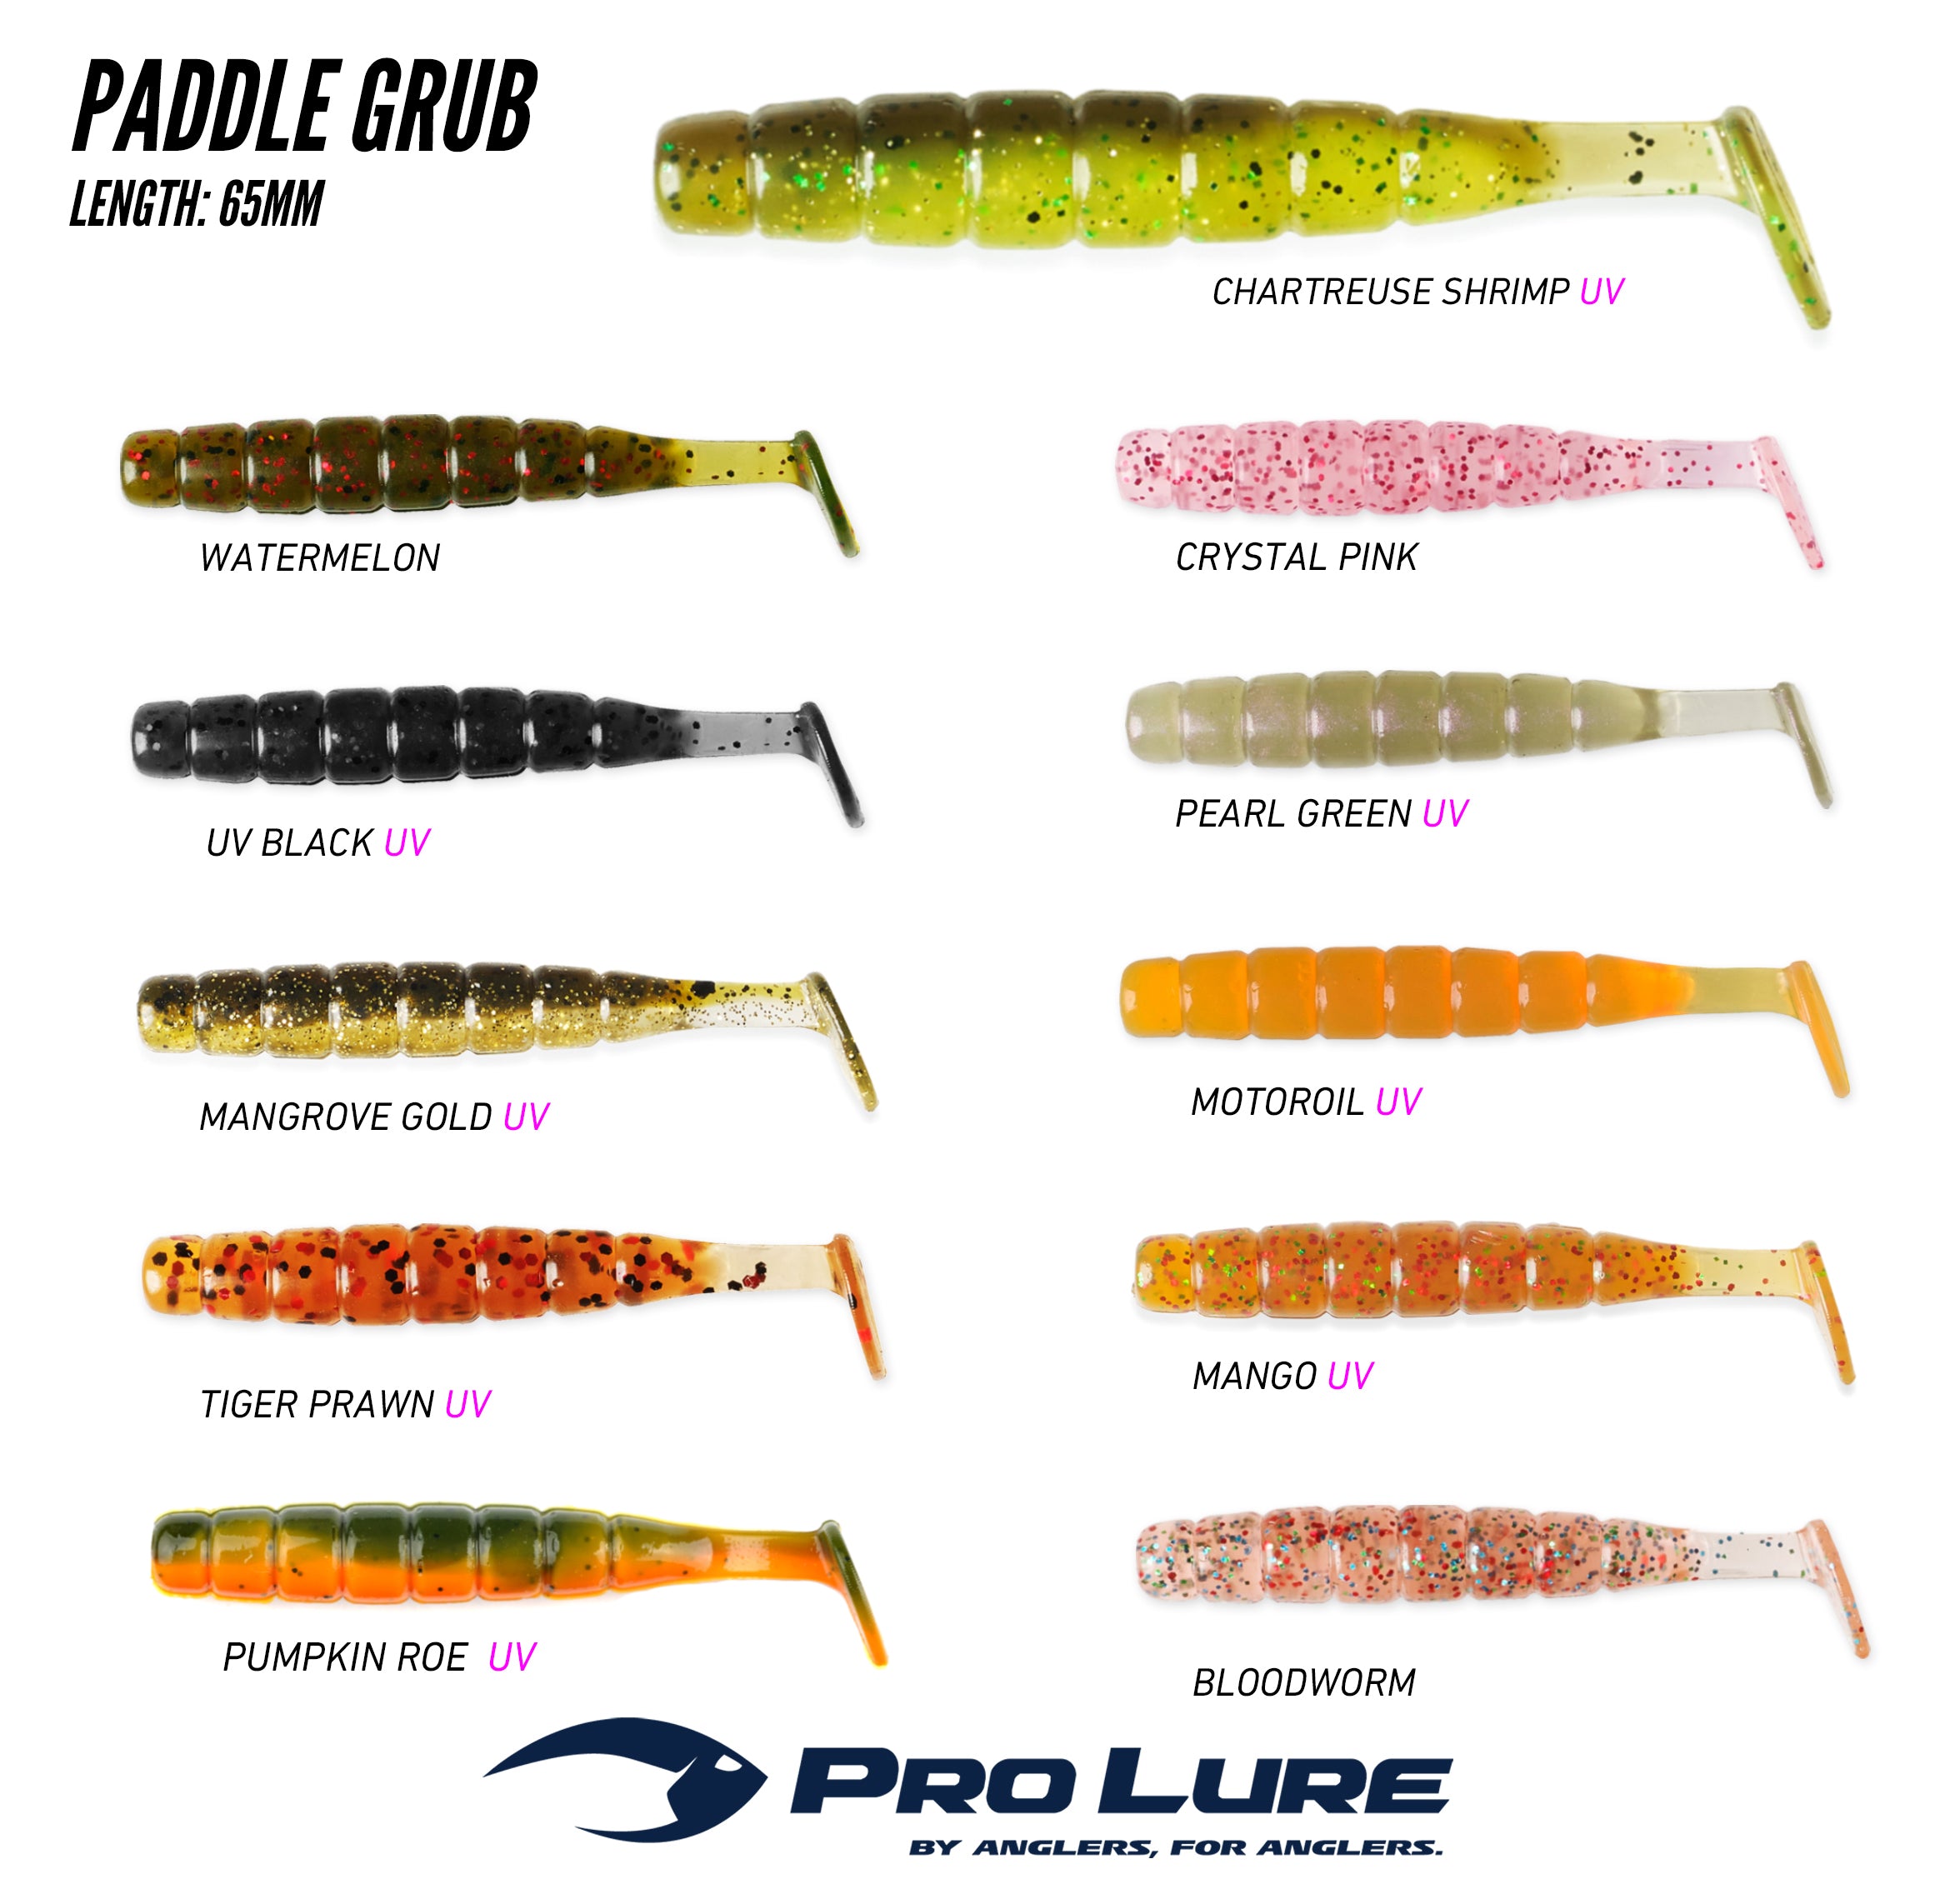 Pro Lure Paddle Grub 65mm – Trophy Trout Lures and Fly Fishing